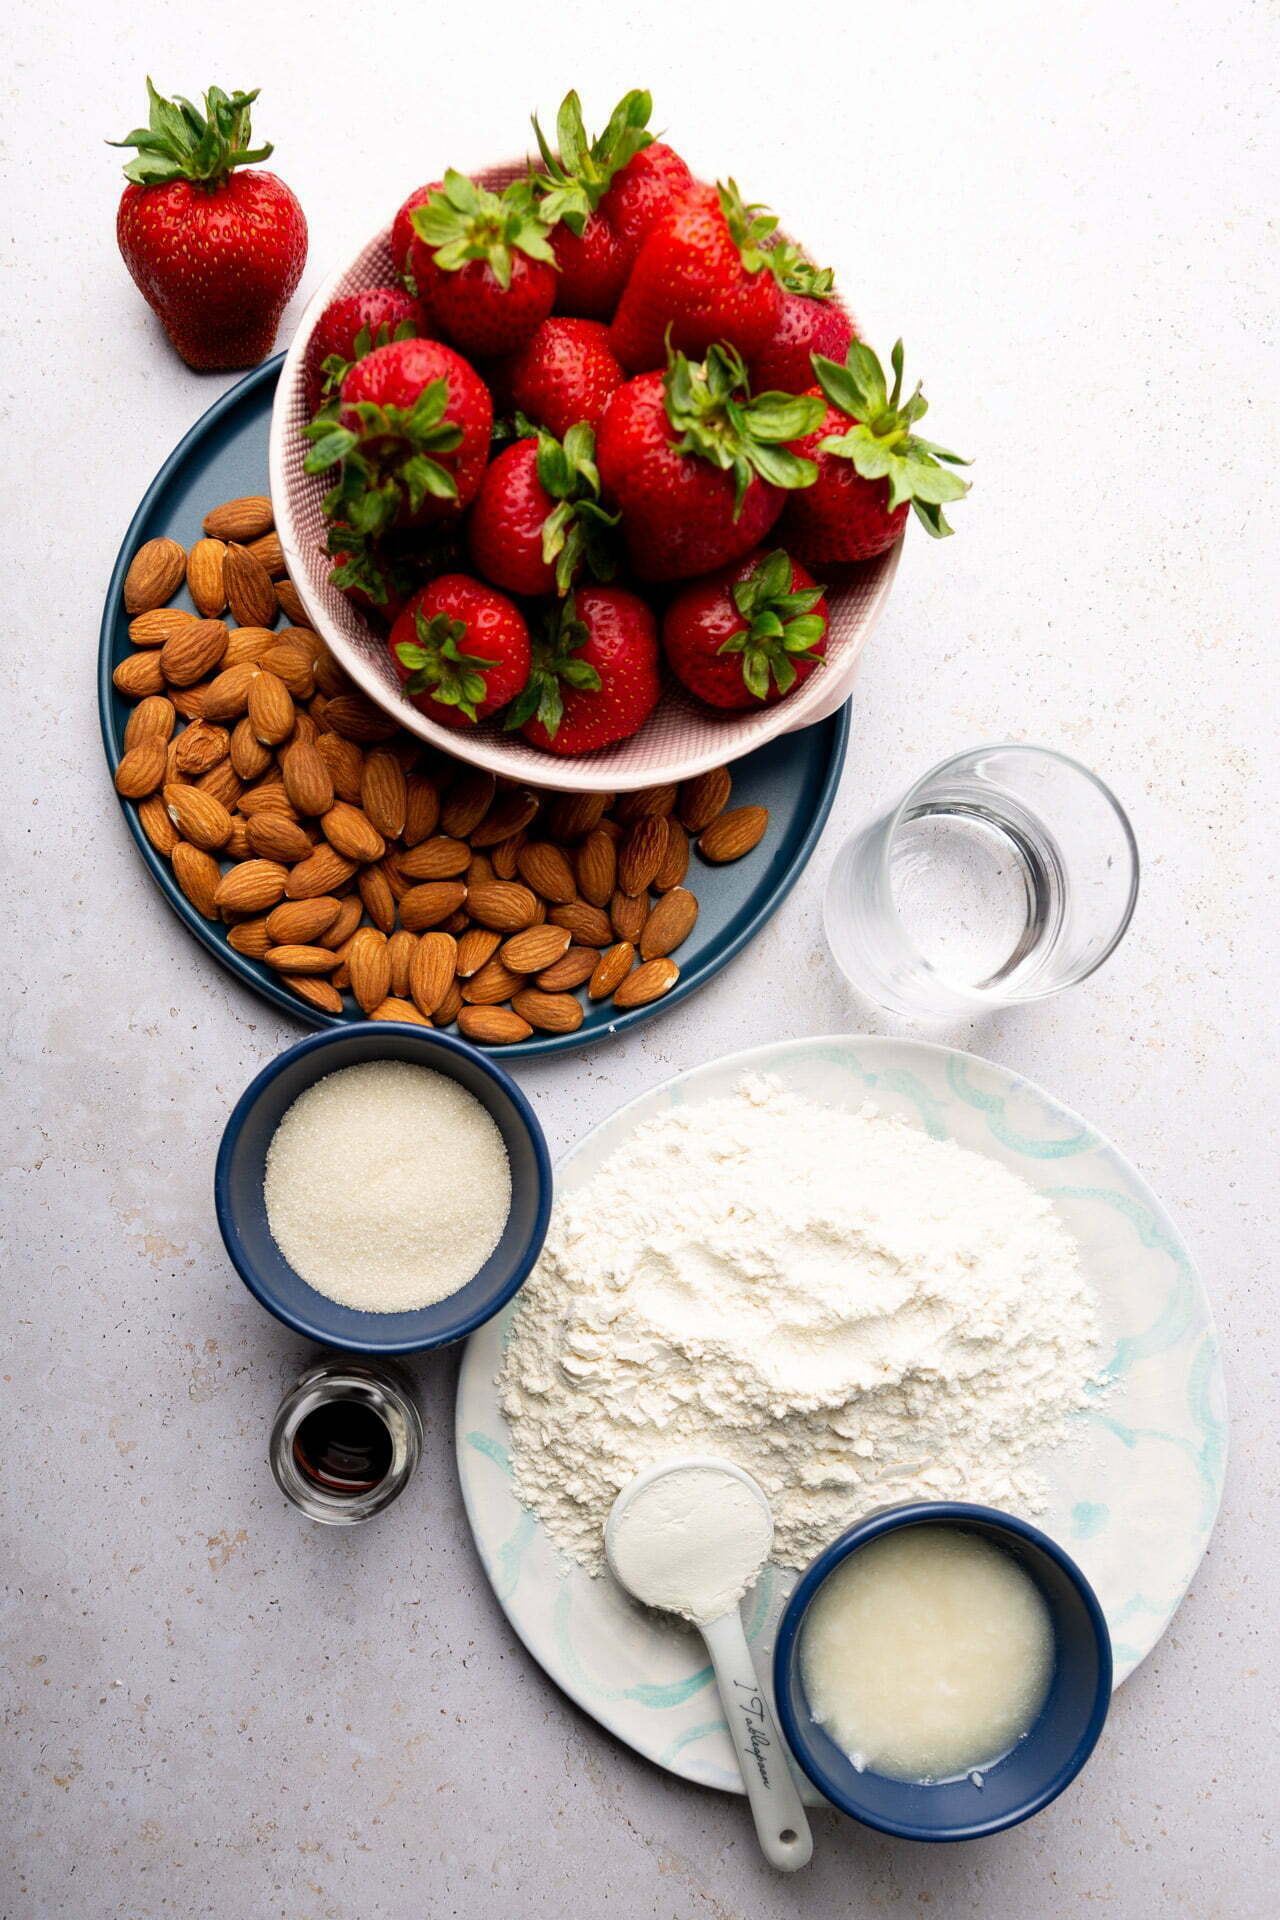 ingredients for Almond Crust Strawberry Galette  placed on small plates